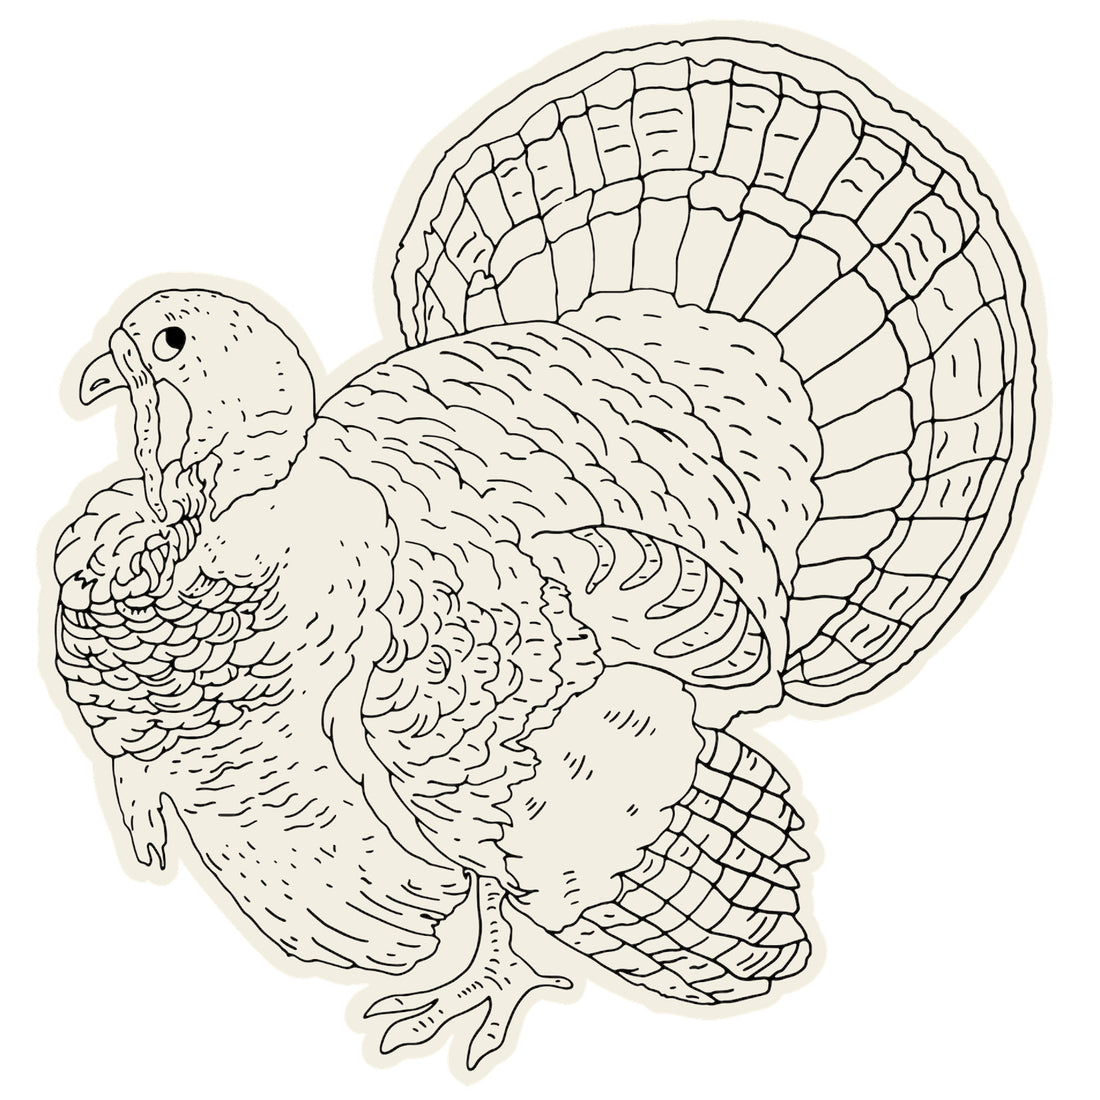 A coloring-book style line drawing of a plump turkey.